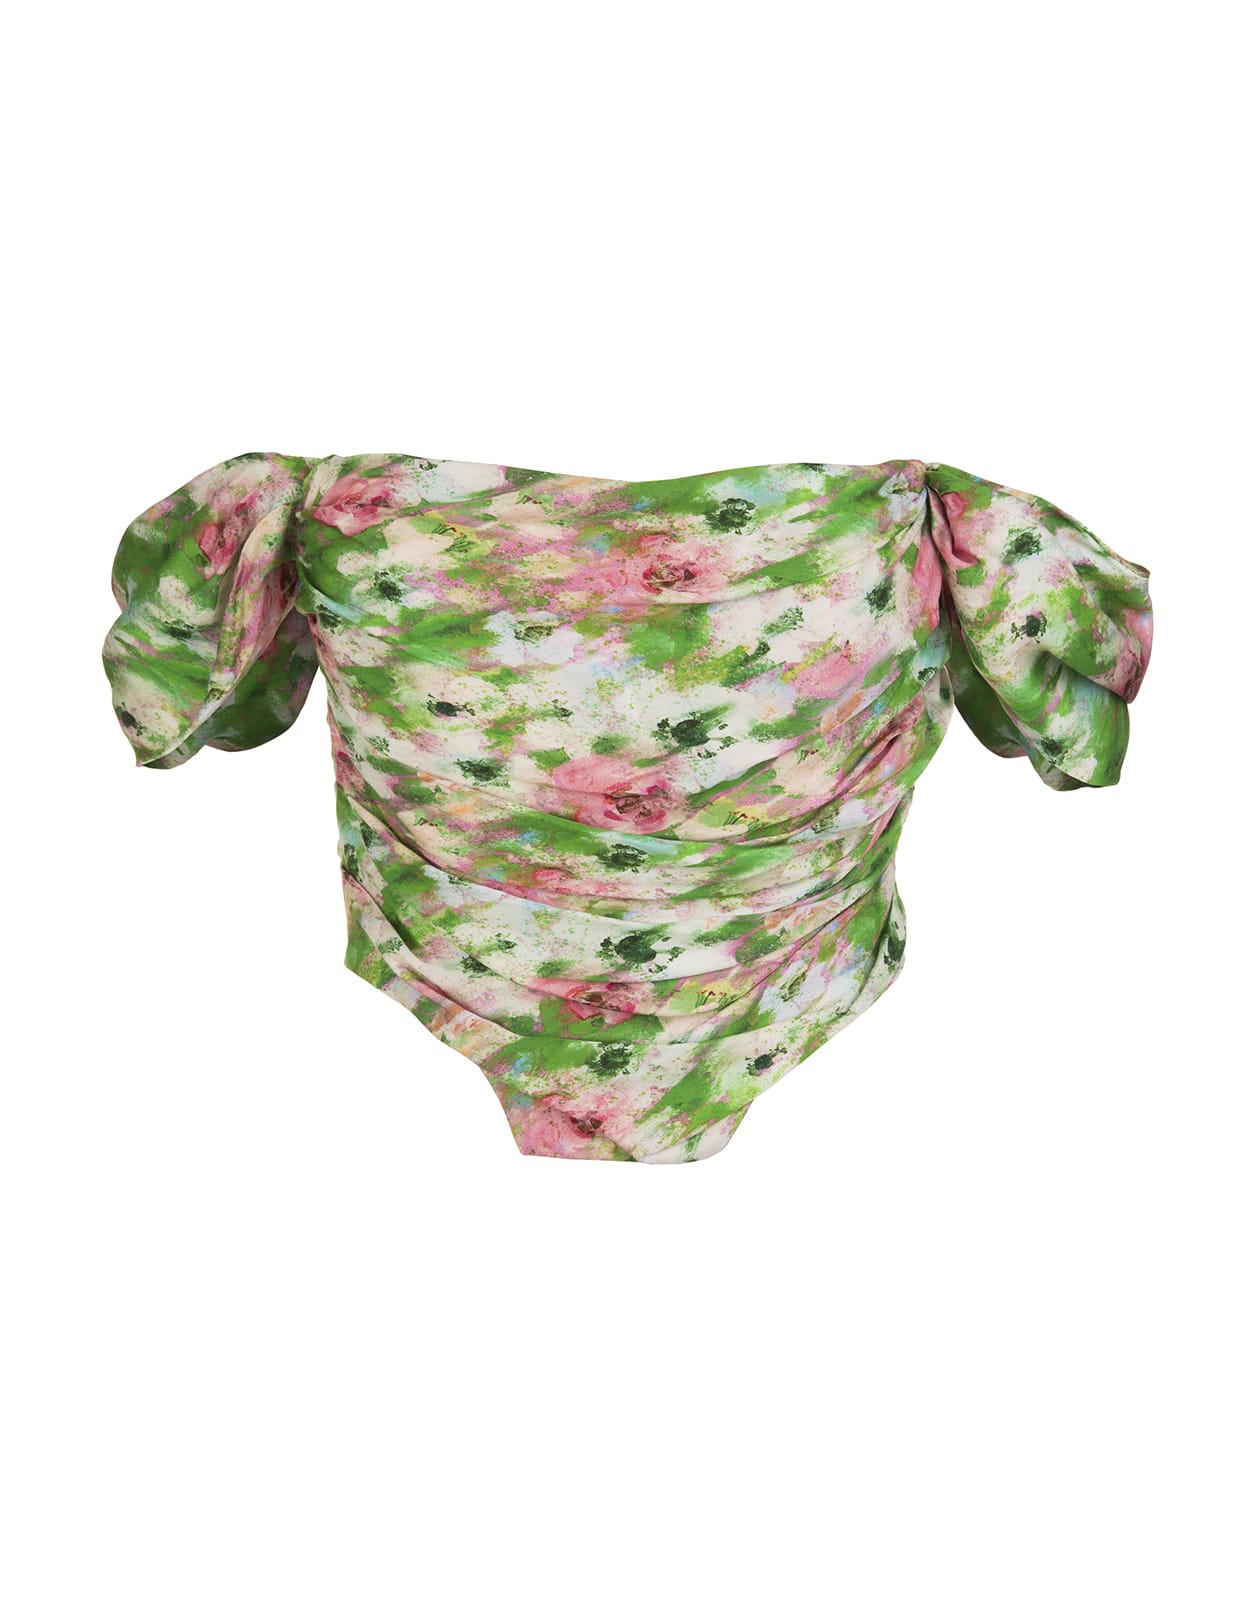 Giuseppe di Morabito Bustier Top With Draping And All-over Green And Pink Floral Print